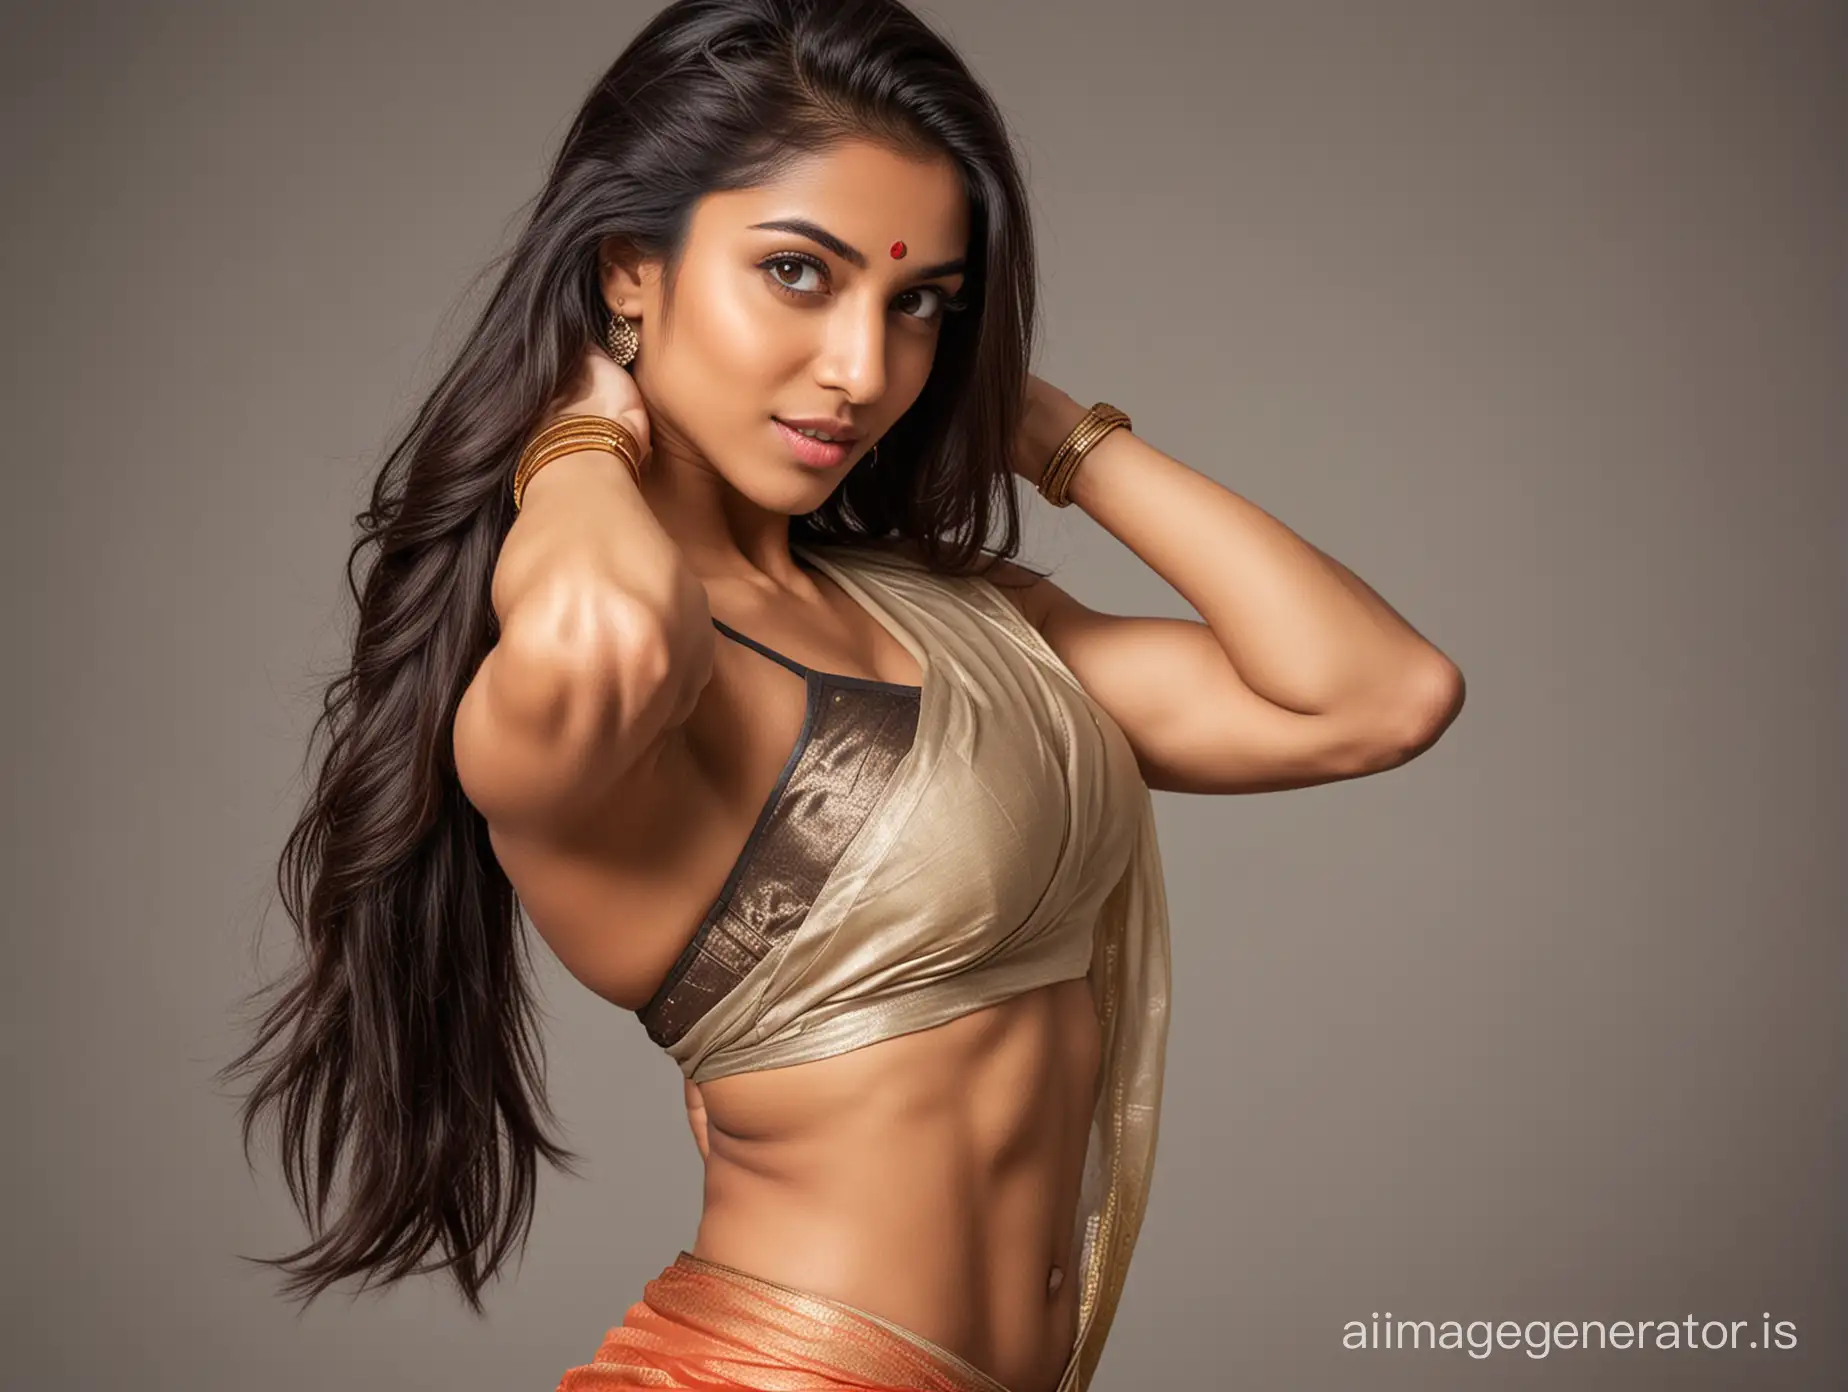 Muscular-Indian-Woman-in-Saree-Flaunting-EightPack-Abs-and-Long-Hair